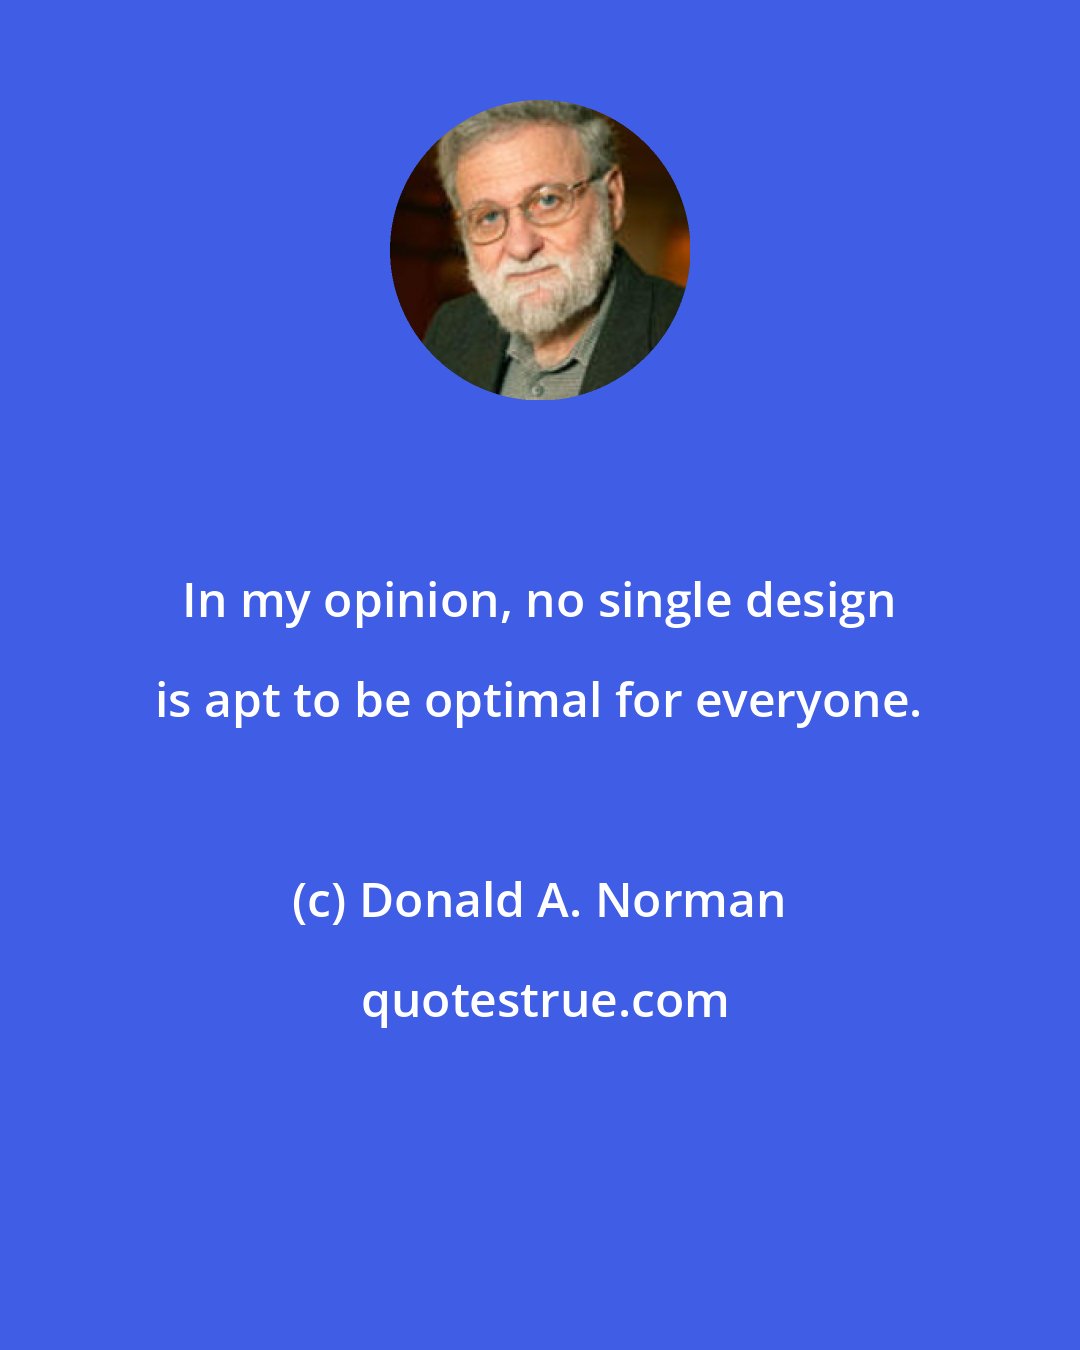 Donald A. Norman: In my opinion, no single design is apt to be optimal for everyone.